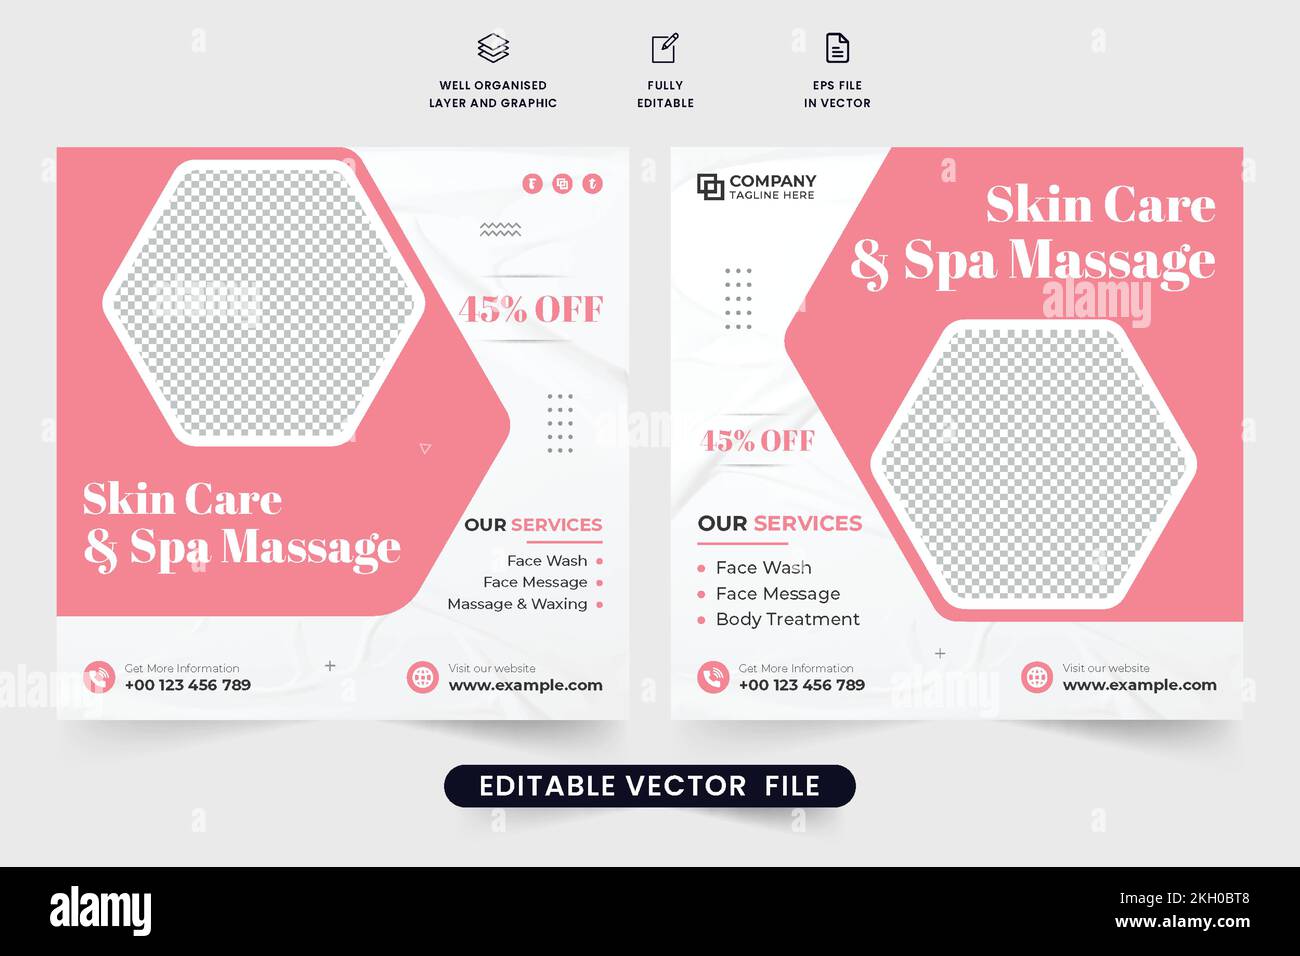 Spa massage and skincare treatment promotional poster design with pink and dark colors. Beauty center business advertisement template vector with phot Stock Vector